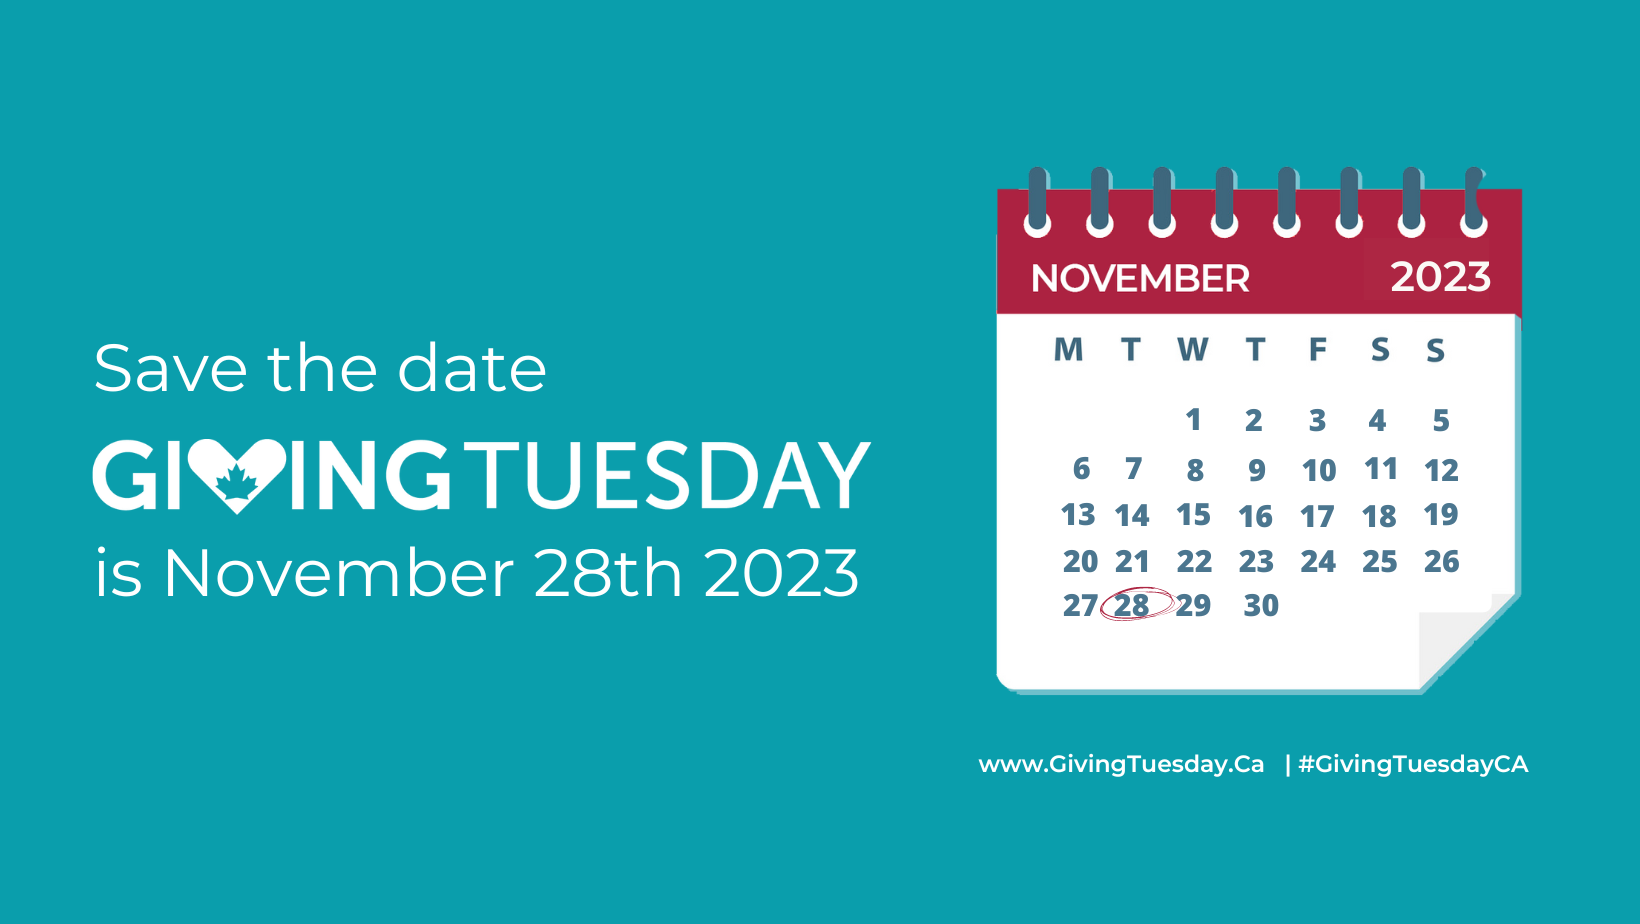 Save the date Giving Tuesday is November 28, 2023